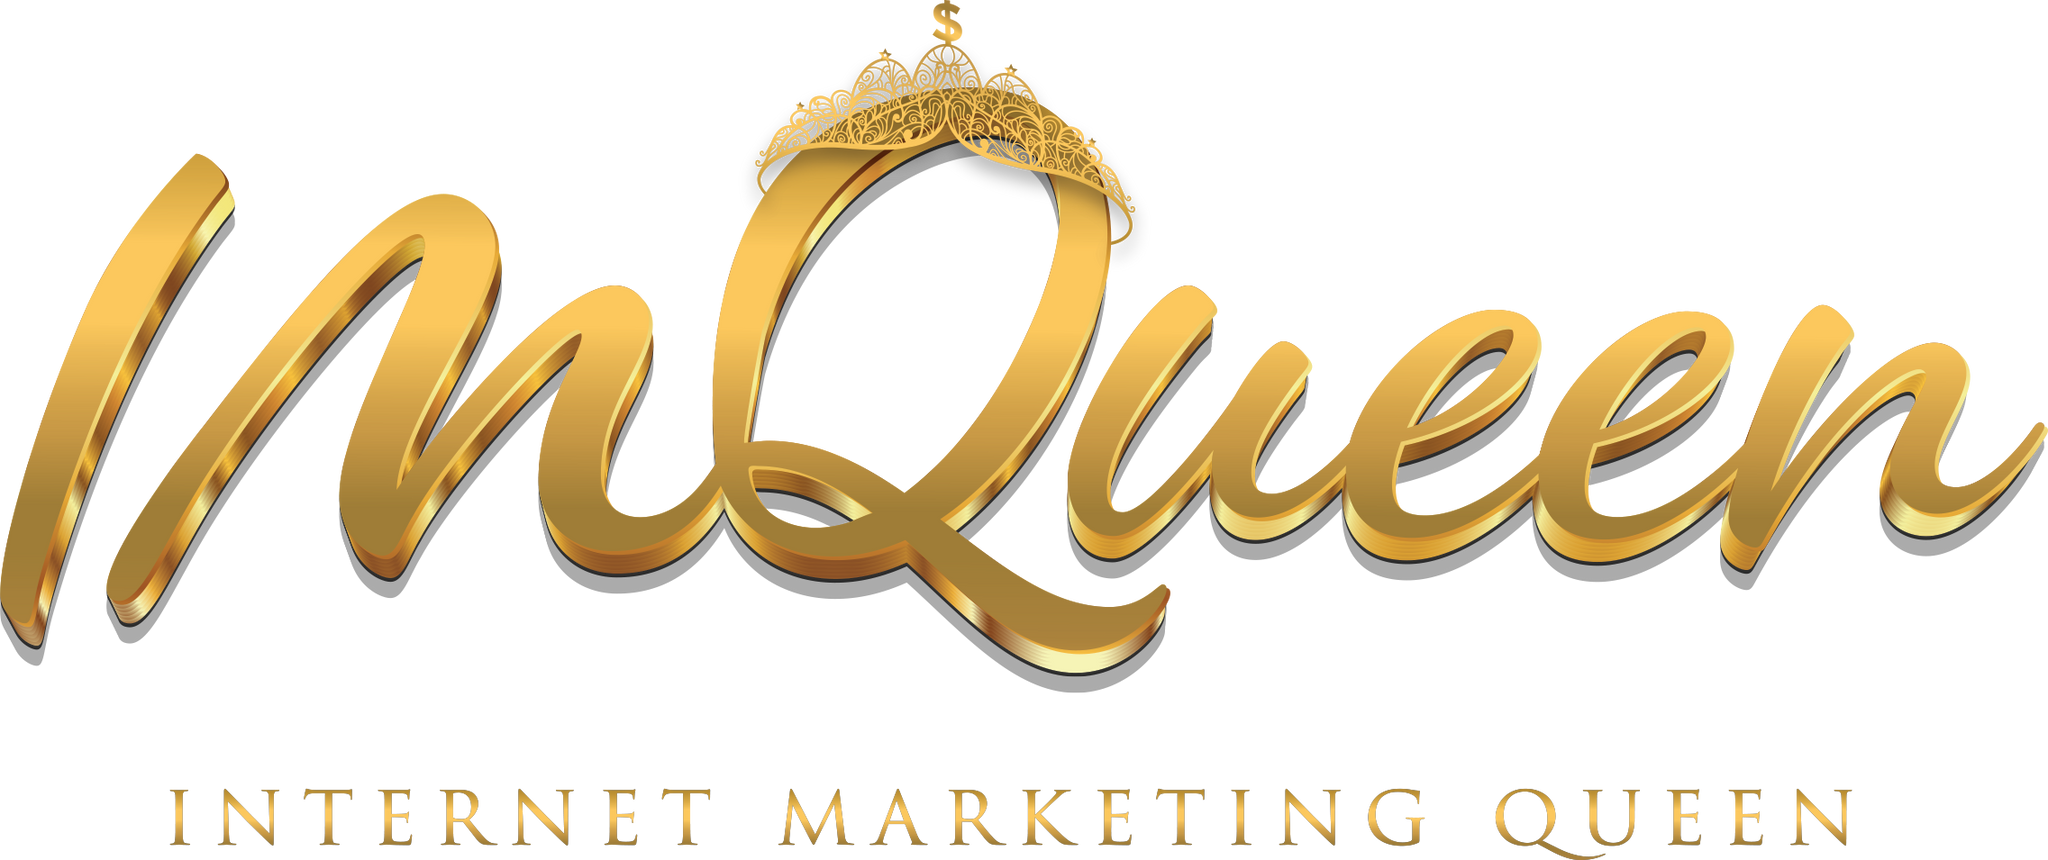 Contact - IMQueen Consulting